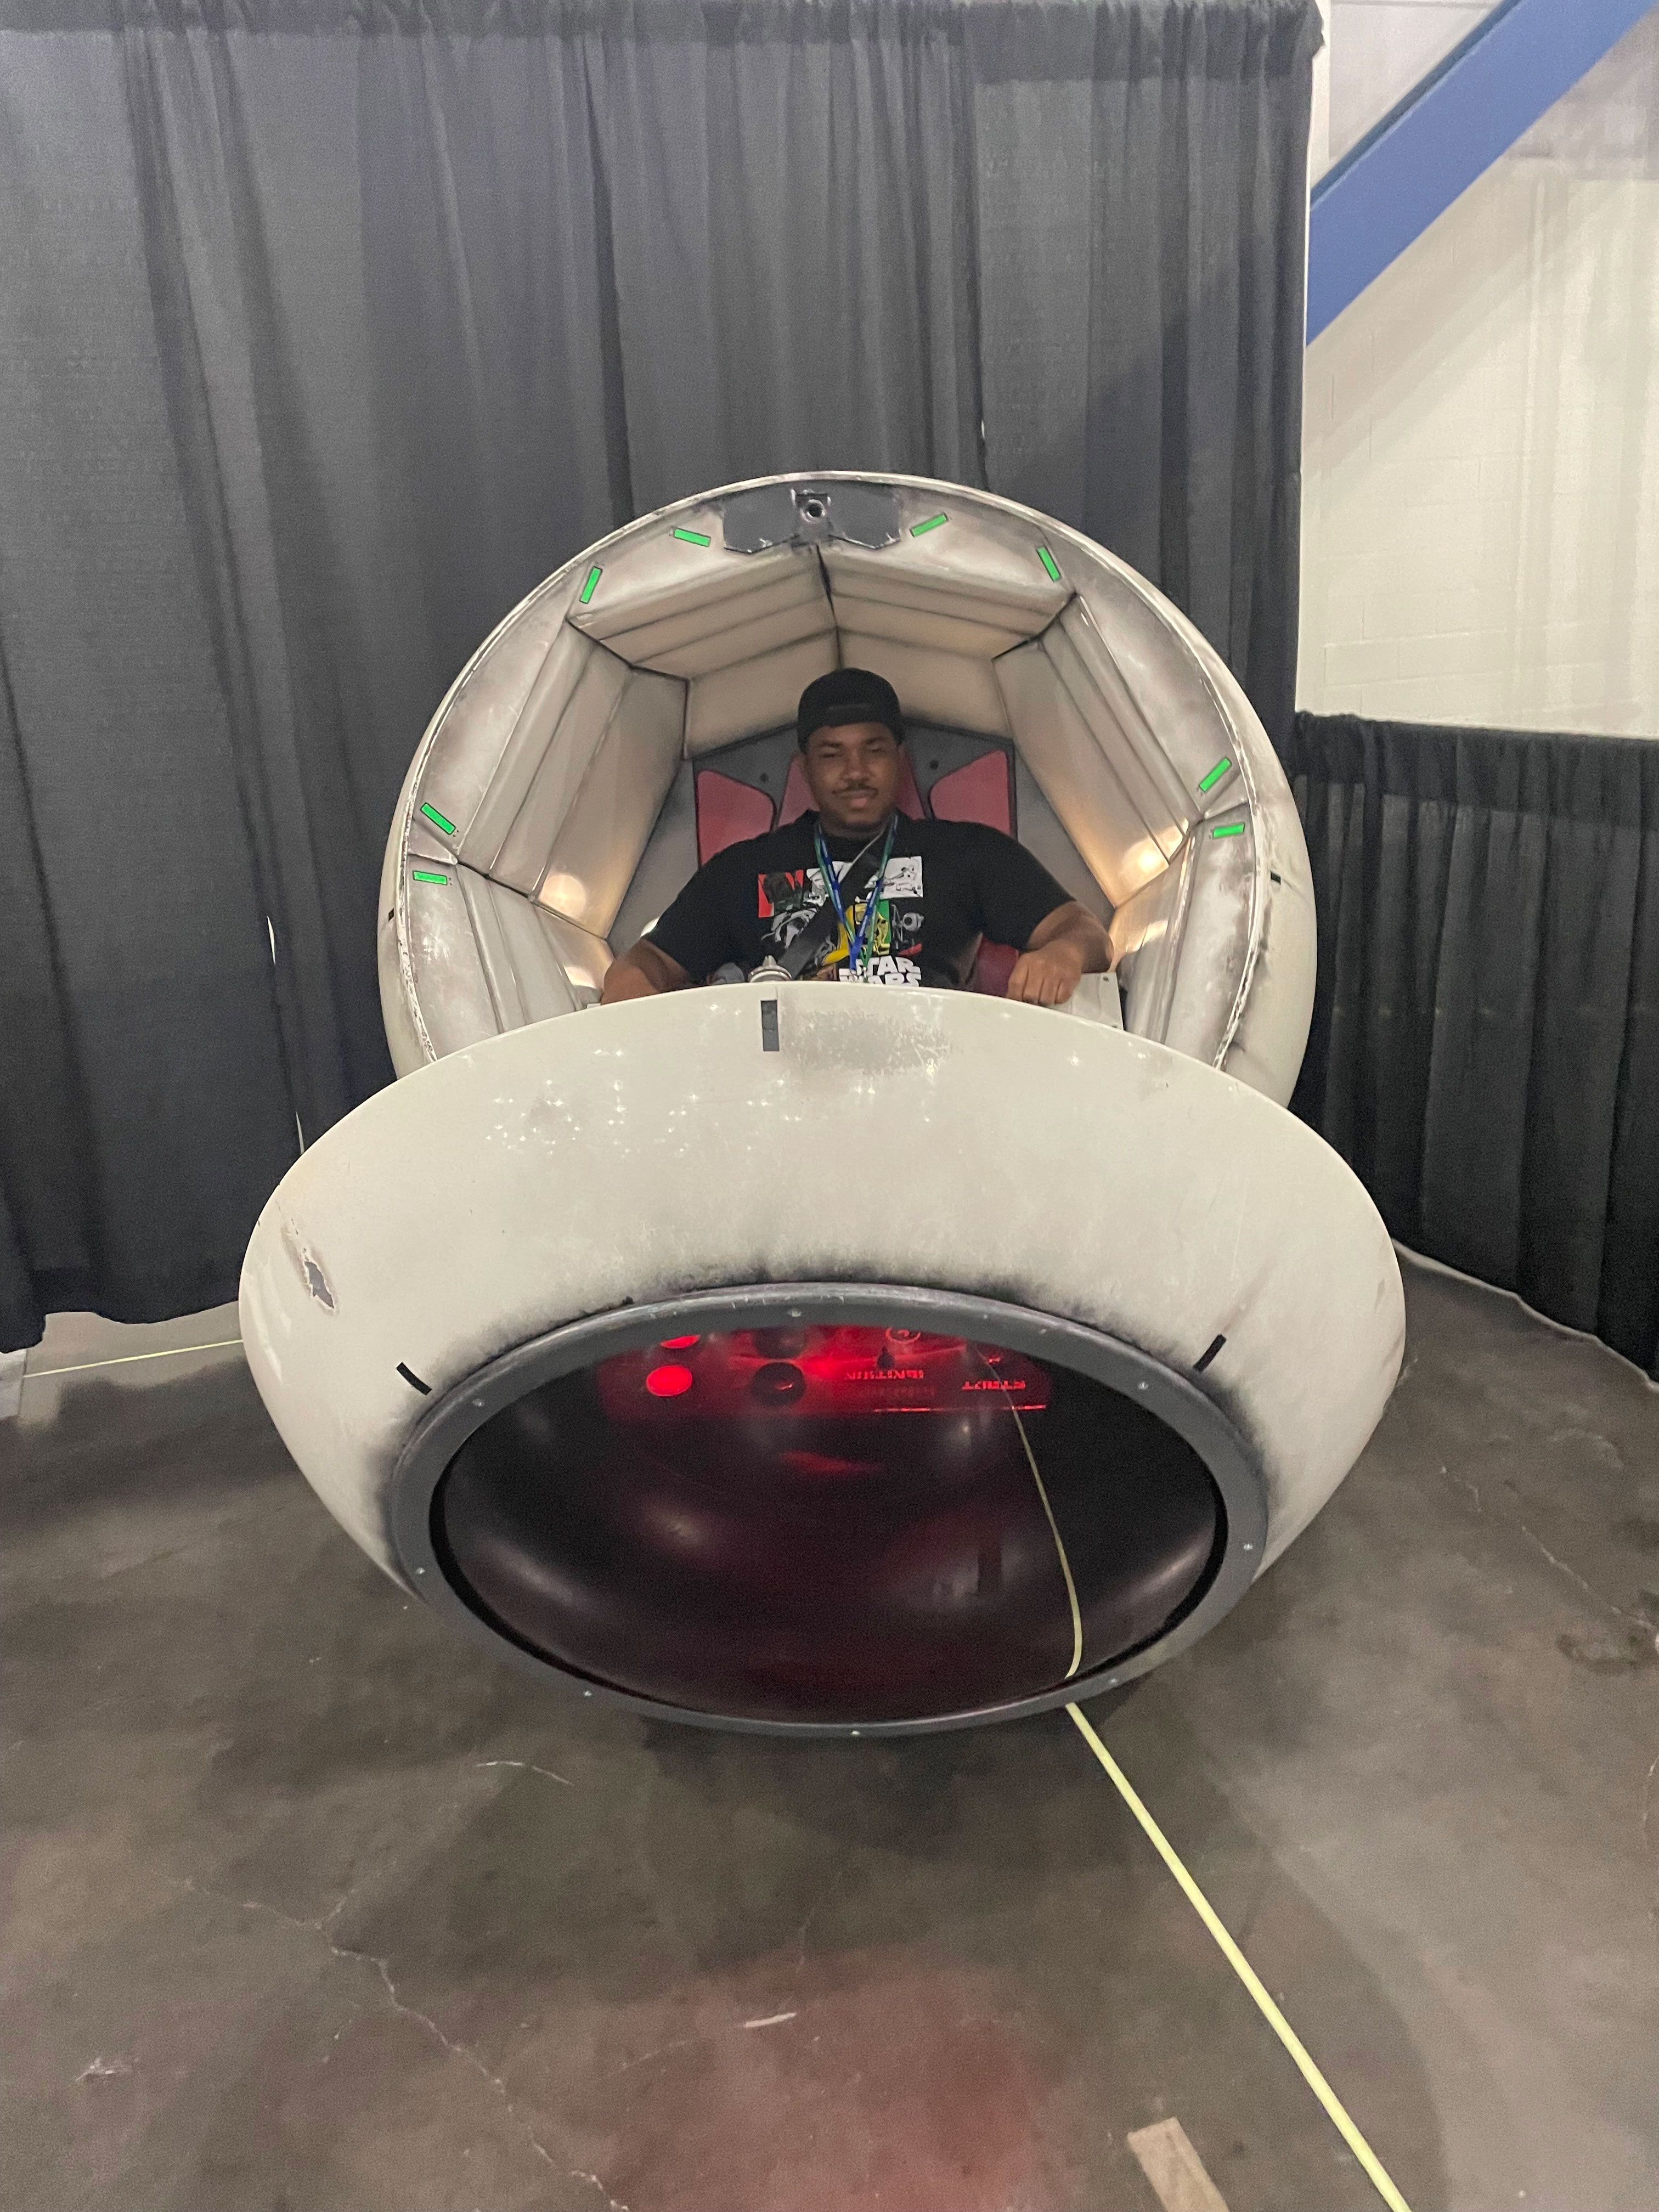 PHOTO: Image depicts boy in Star Wars shirt with hat sitting inside a space pod modeled after pod from Dragon Ball Z. Photo by The Signal Managing Editor of Content and Operations Troylon Griffin II.